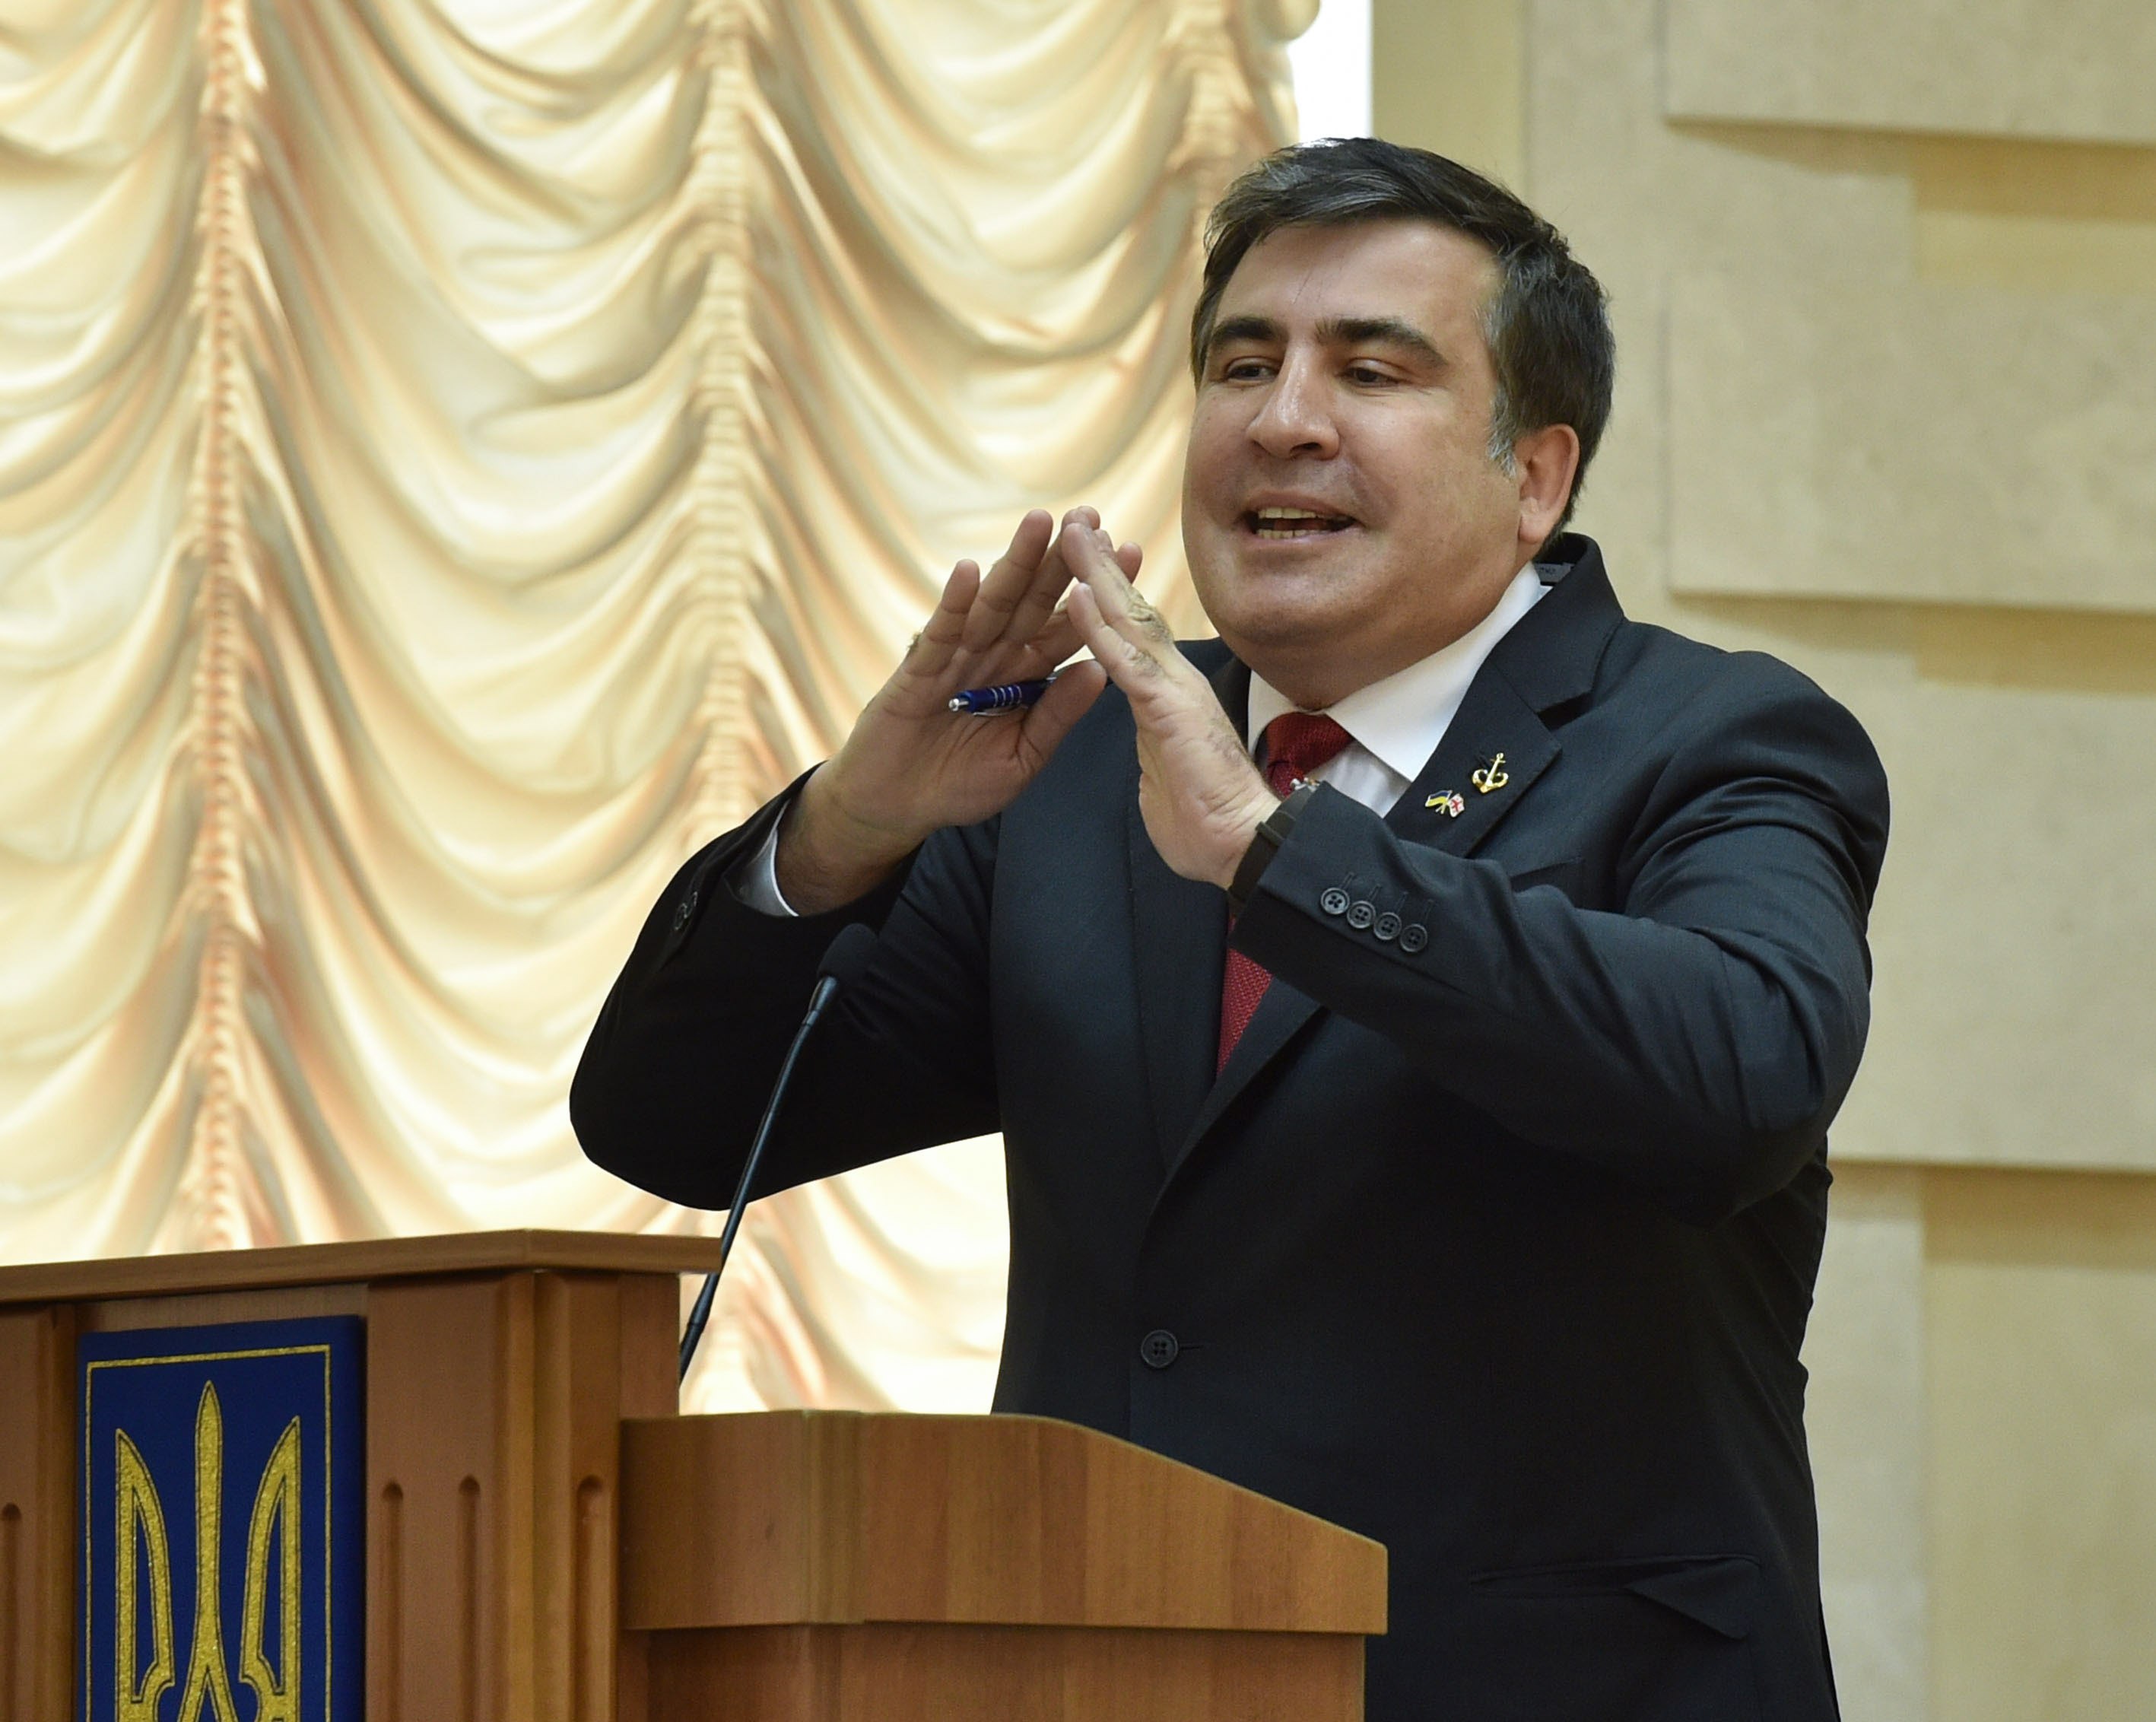 Mikheil Saakashvili gestures during the meeting with Petro Poroshenko in Odessa's regional administration on July 8.